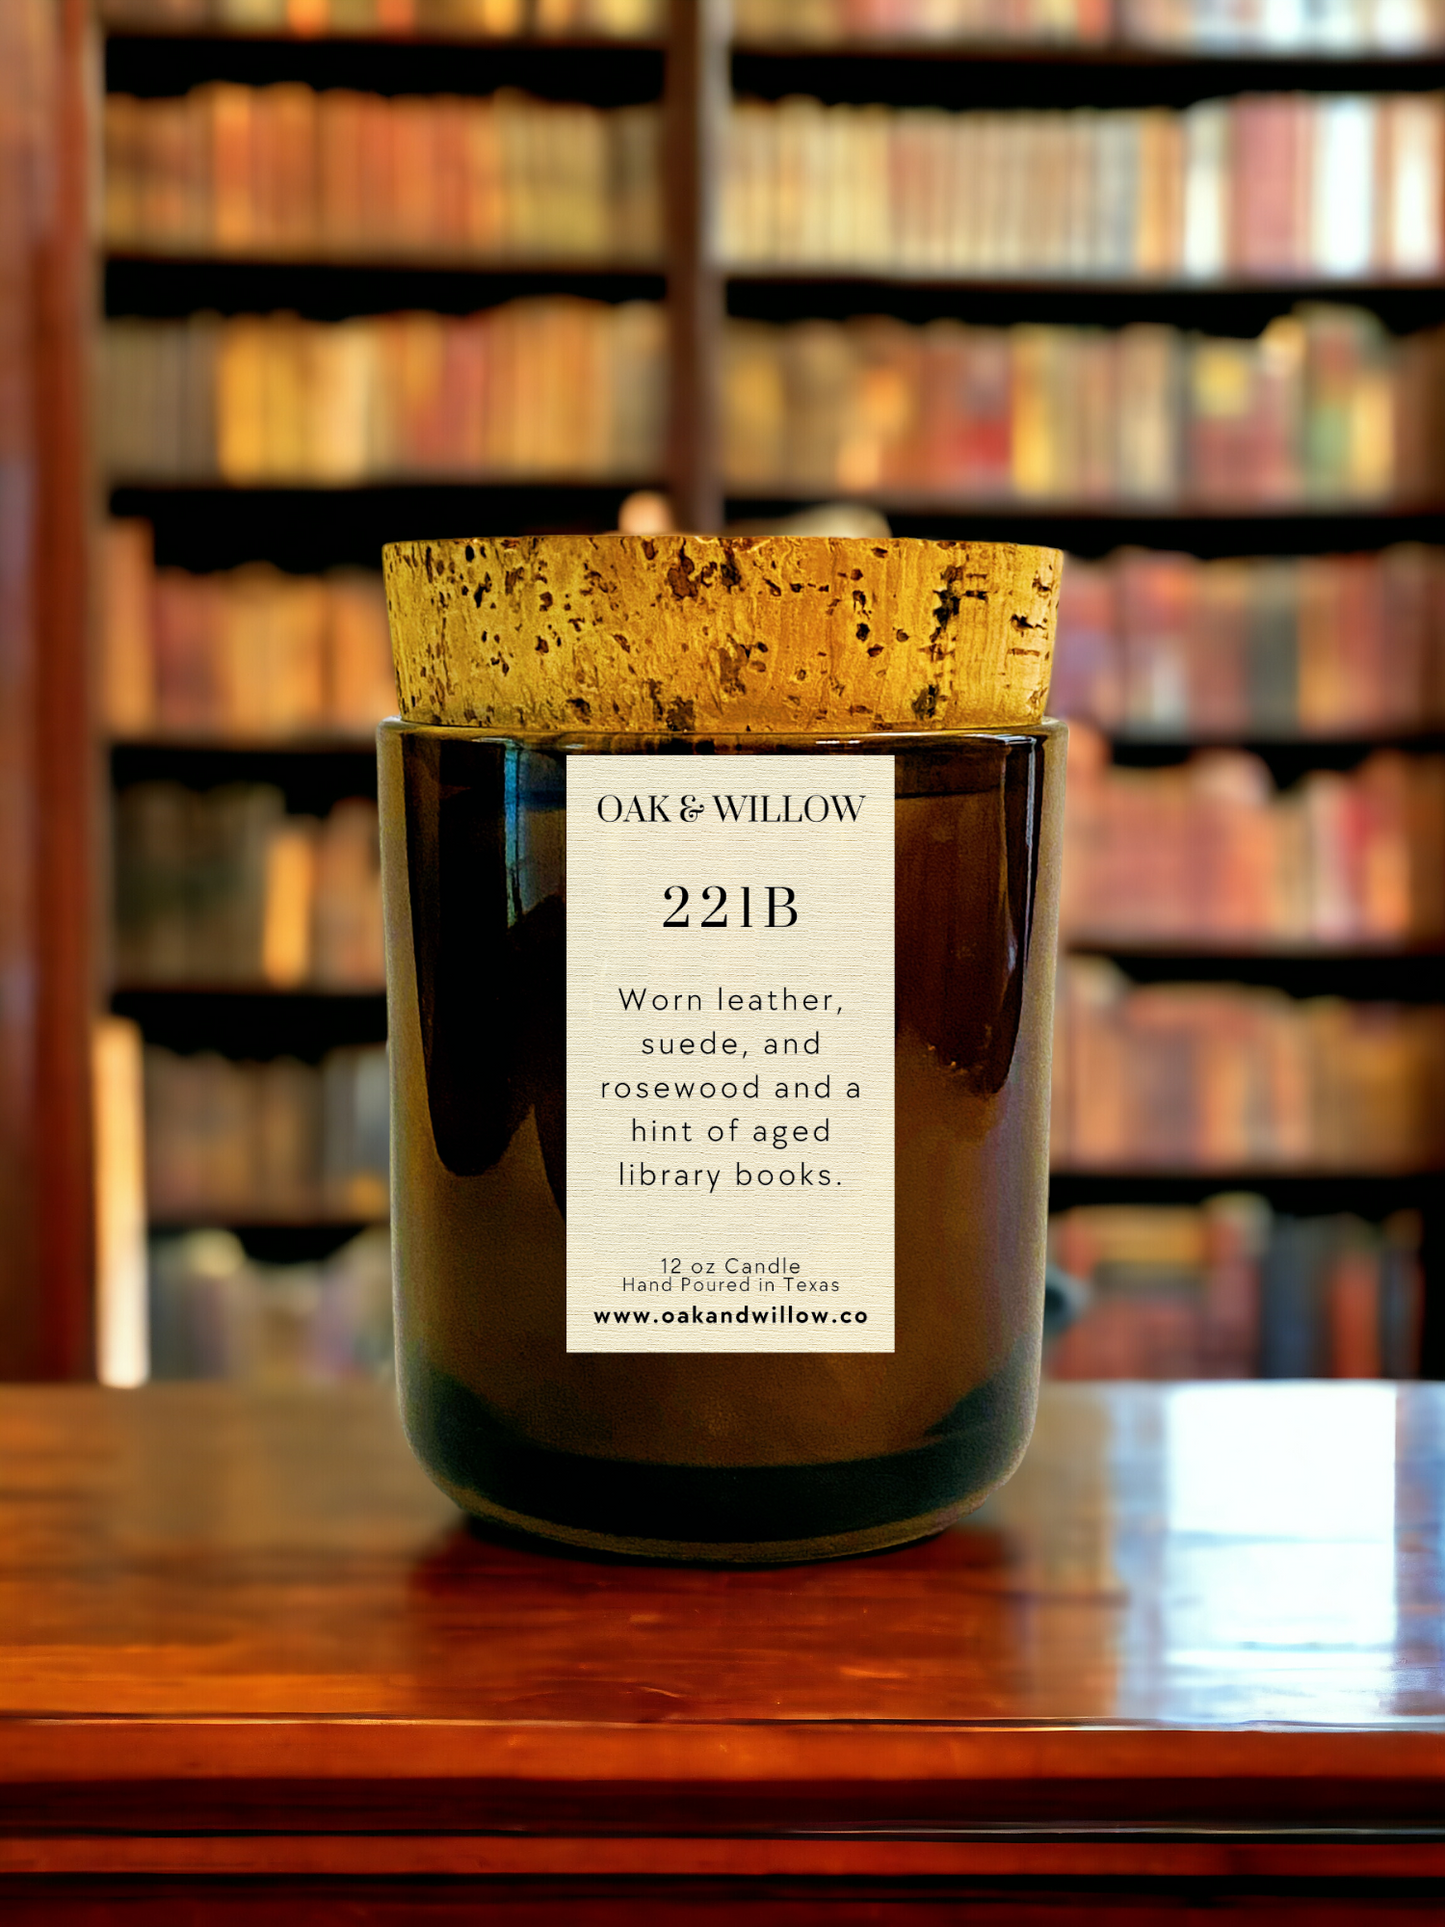 221B - Worn leather, suede, and rosewood and a hint of aged library books. Candle, Body Oil, Perfume, Room Spray